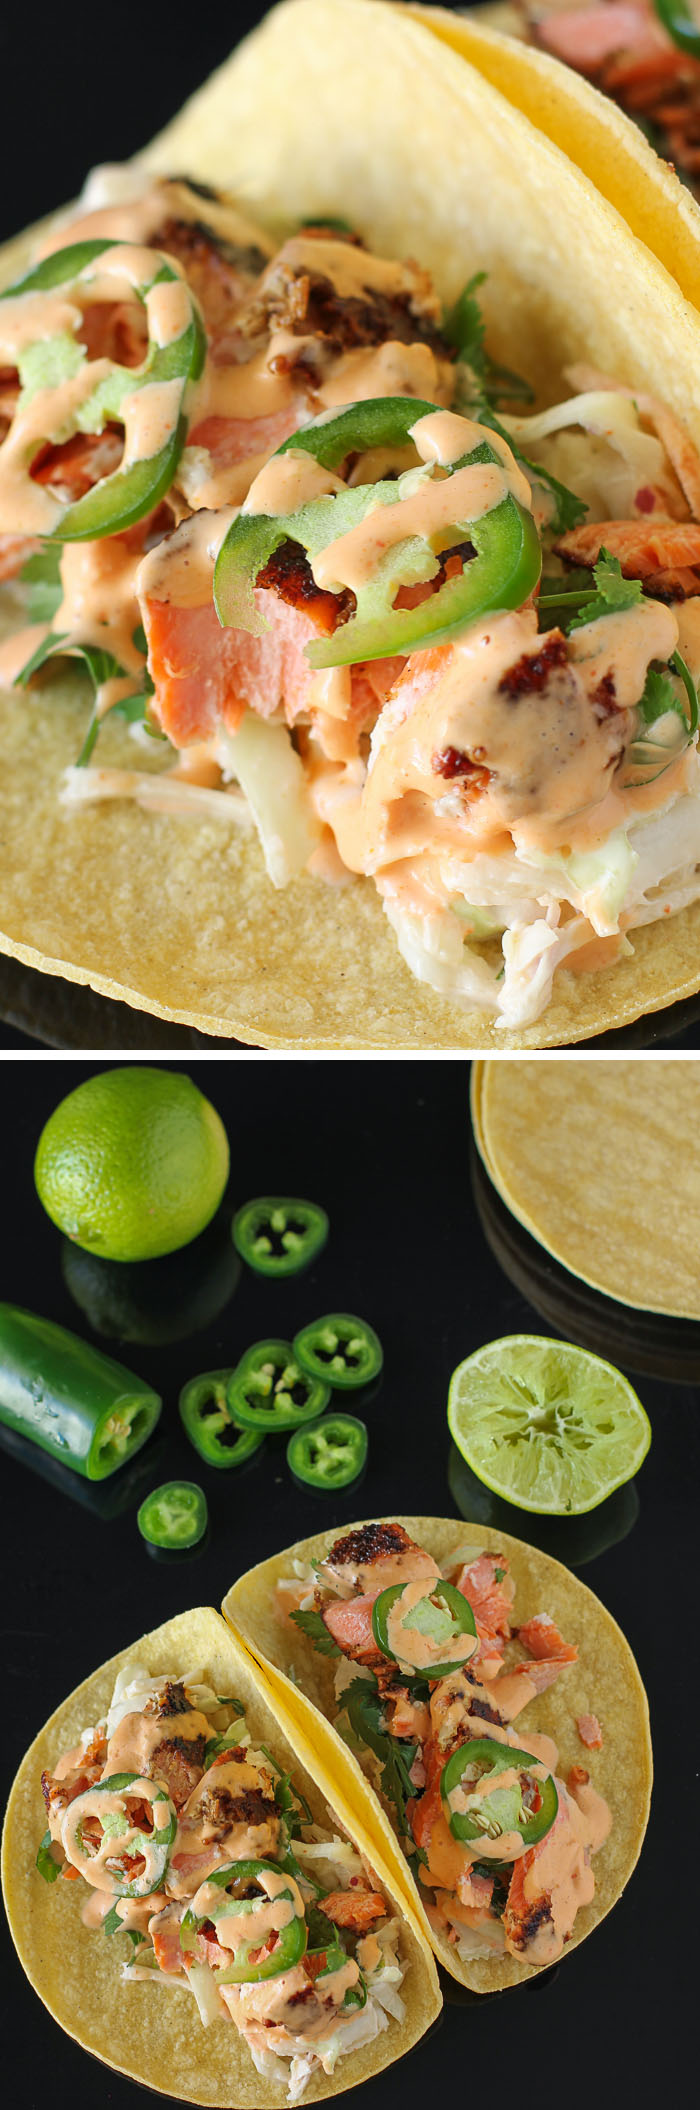 Salmon Tacos with Cilantro-Lime Slaw: a delicious, quick, and simple (low-carb!) weeknight dinner recipe.